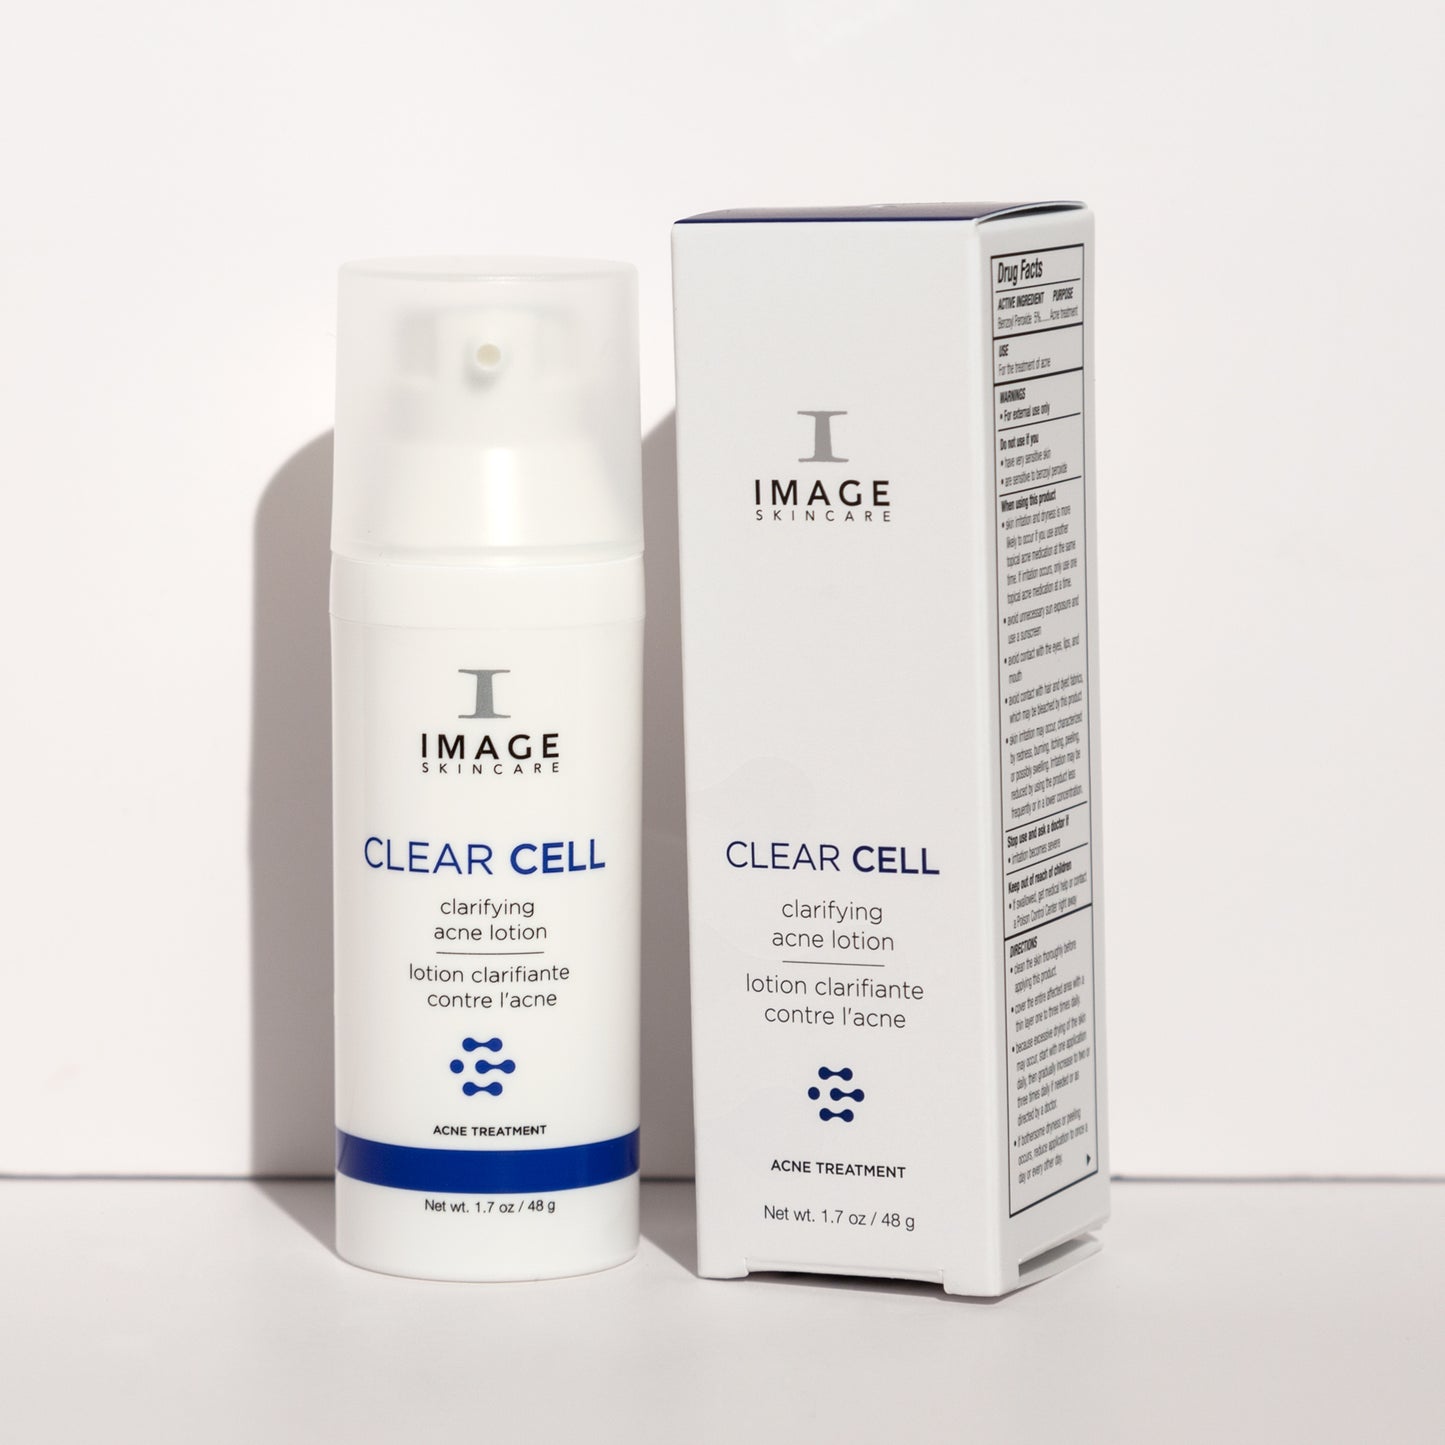 Clear Cell Clarifying Acne Lotion (1.7 oz)